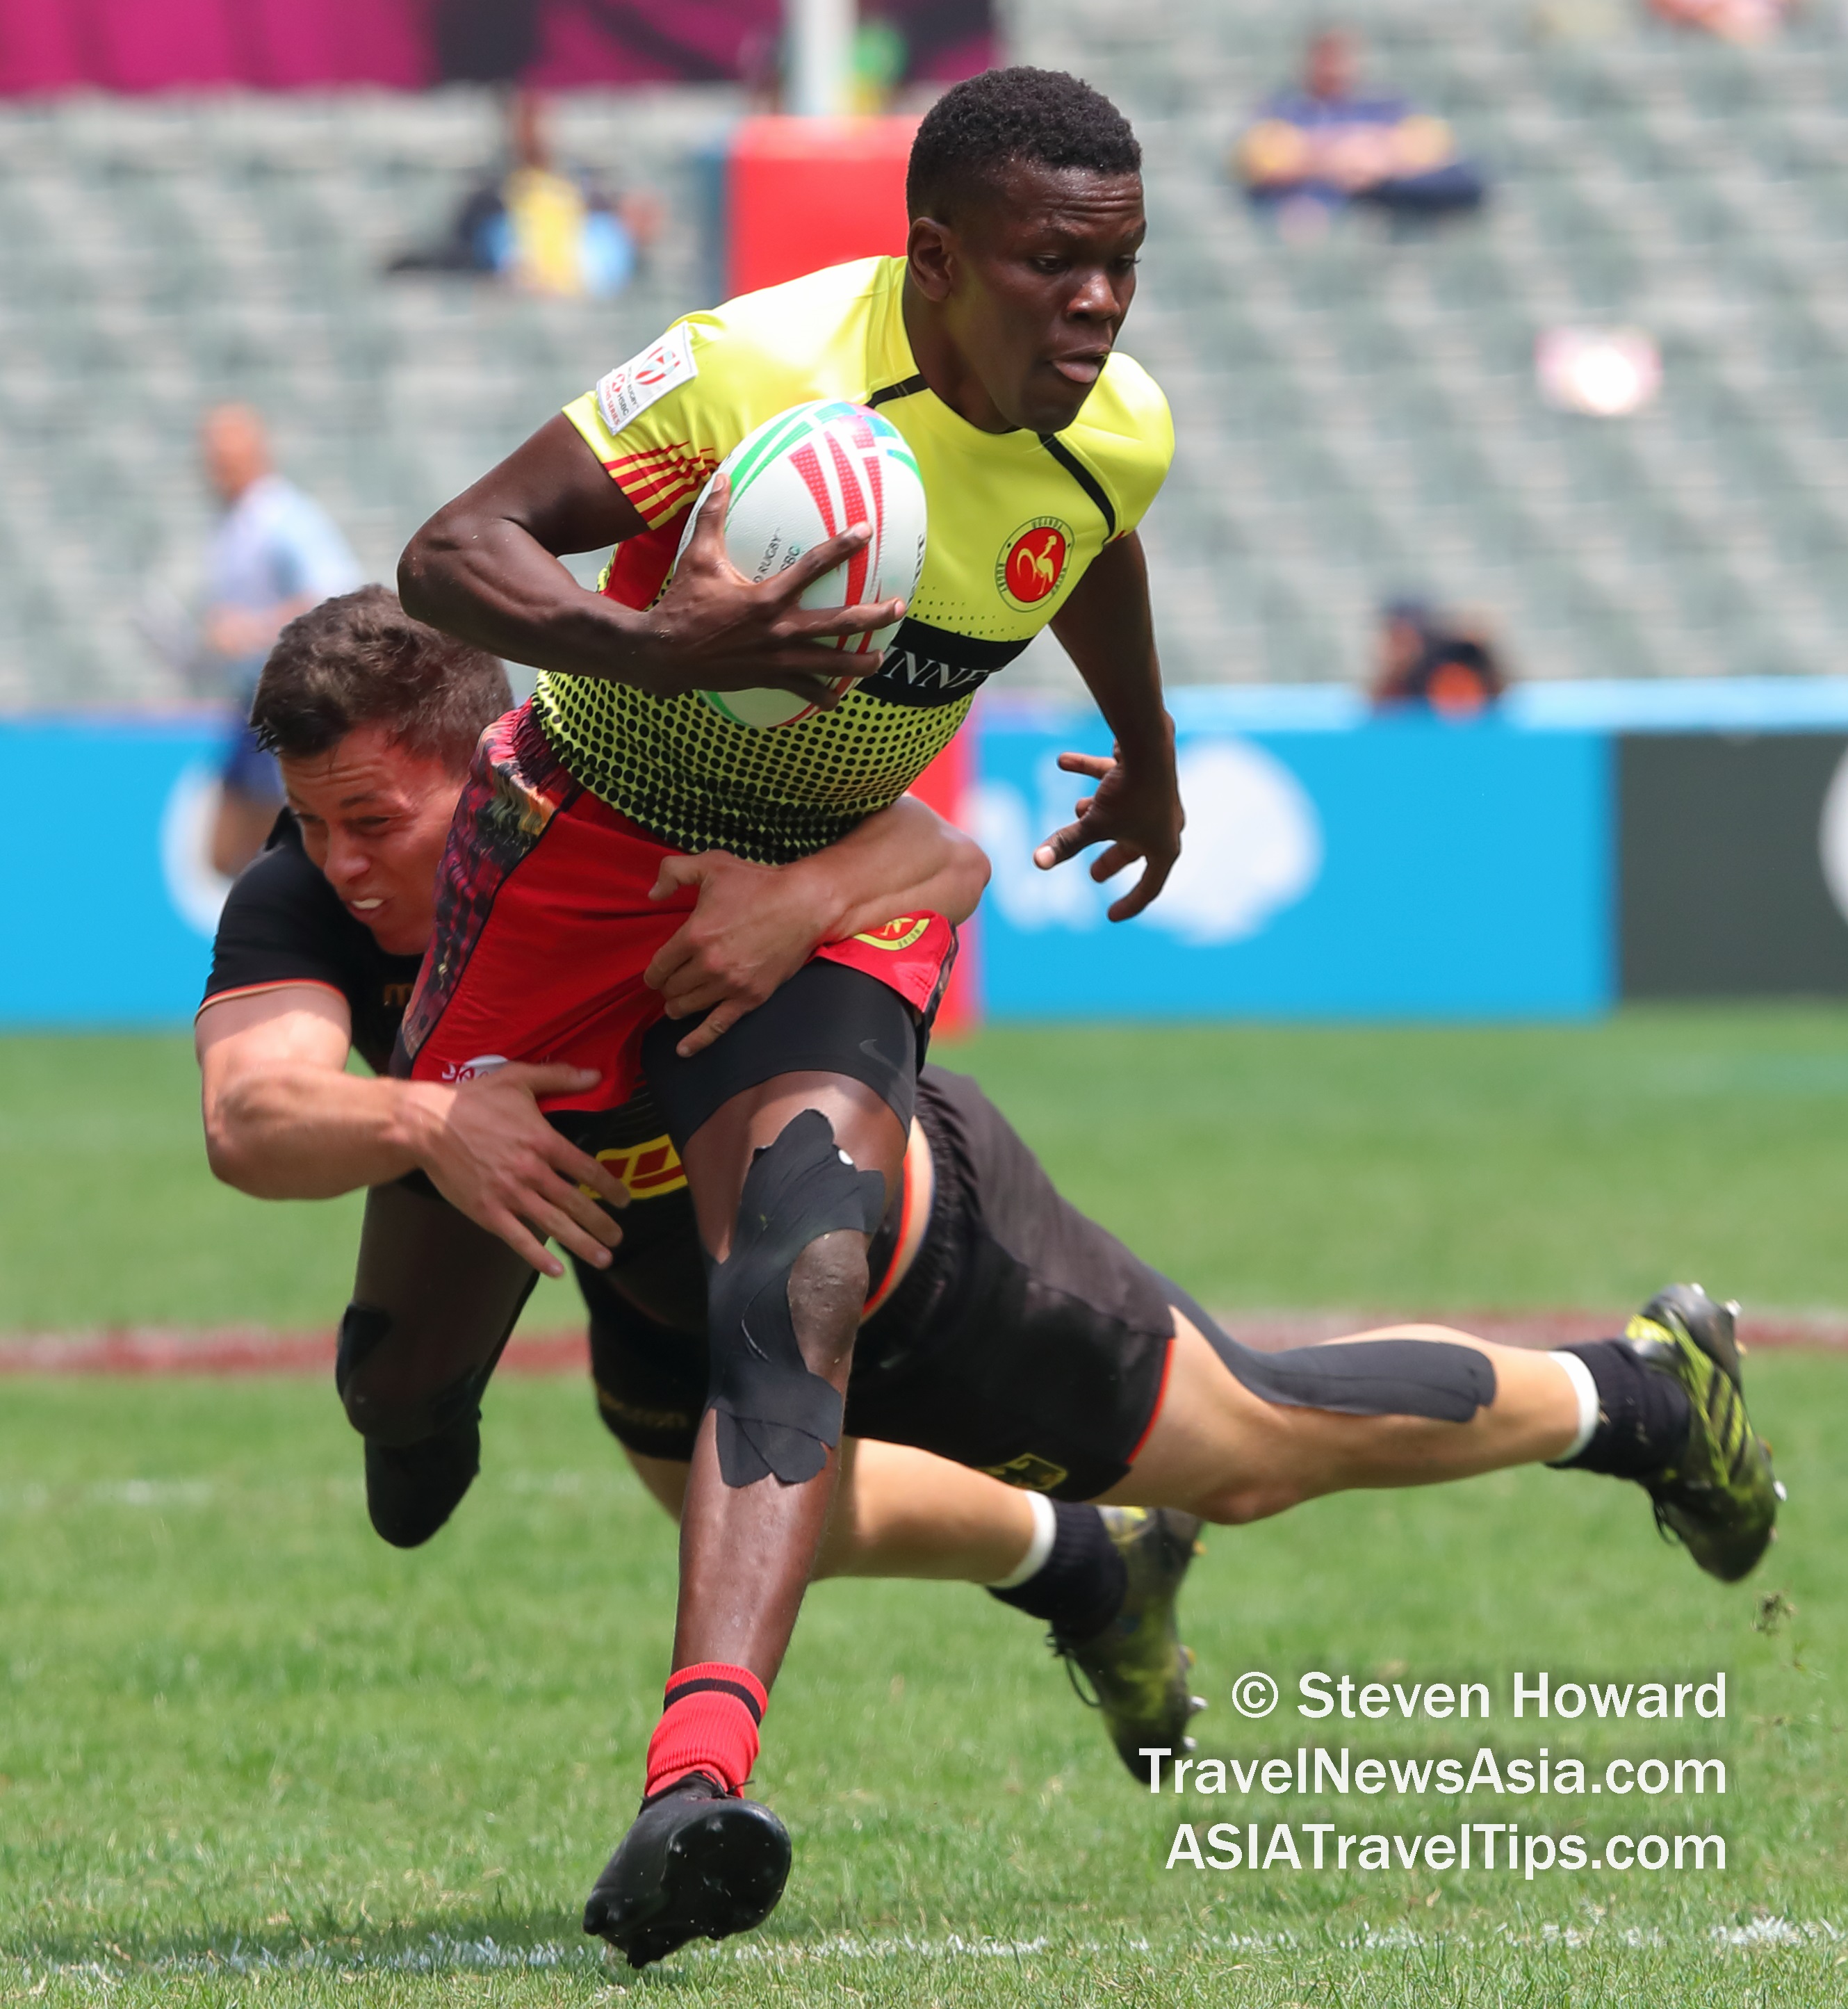 Germany 7s and Uganda 7s in action at HK7s 2019. Picture by Steven Howard of TravelNewsAsia.com Click to enlarge.